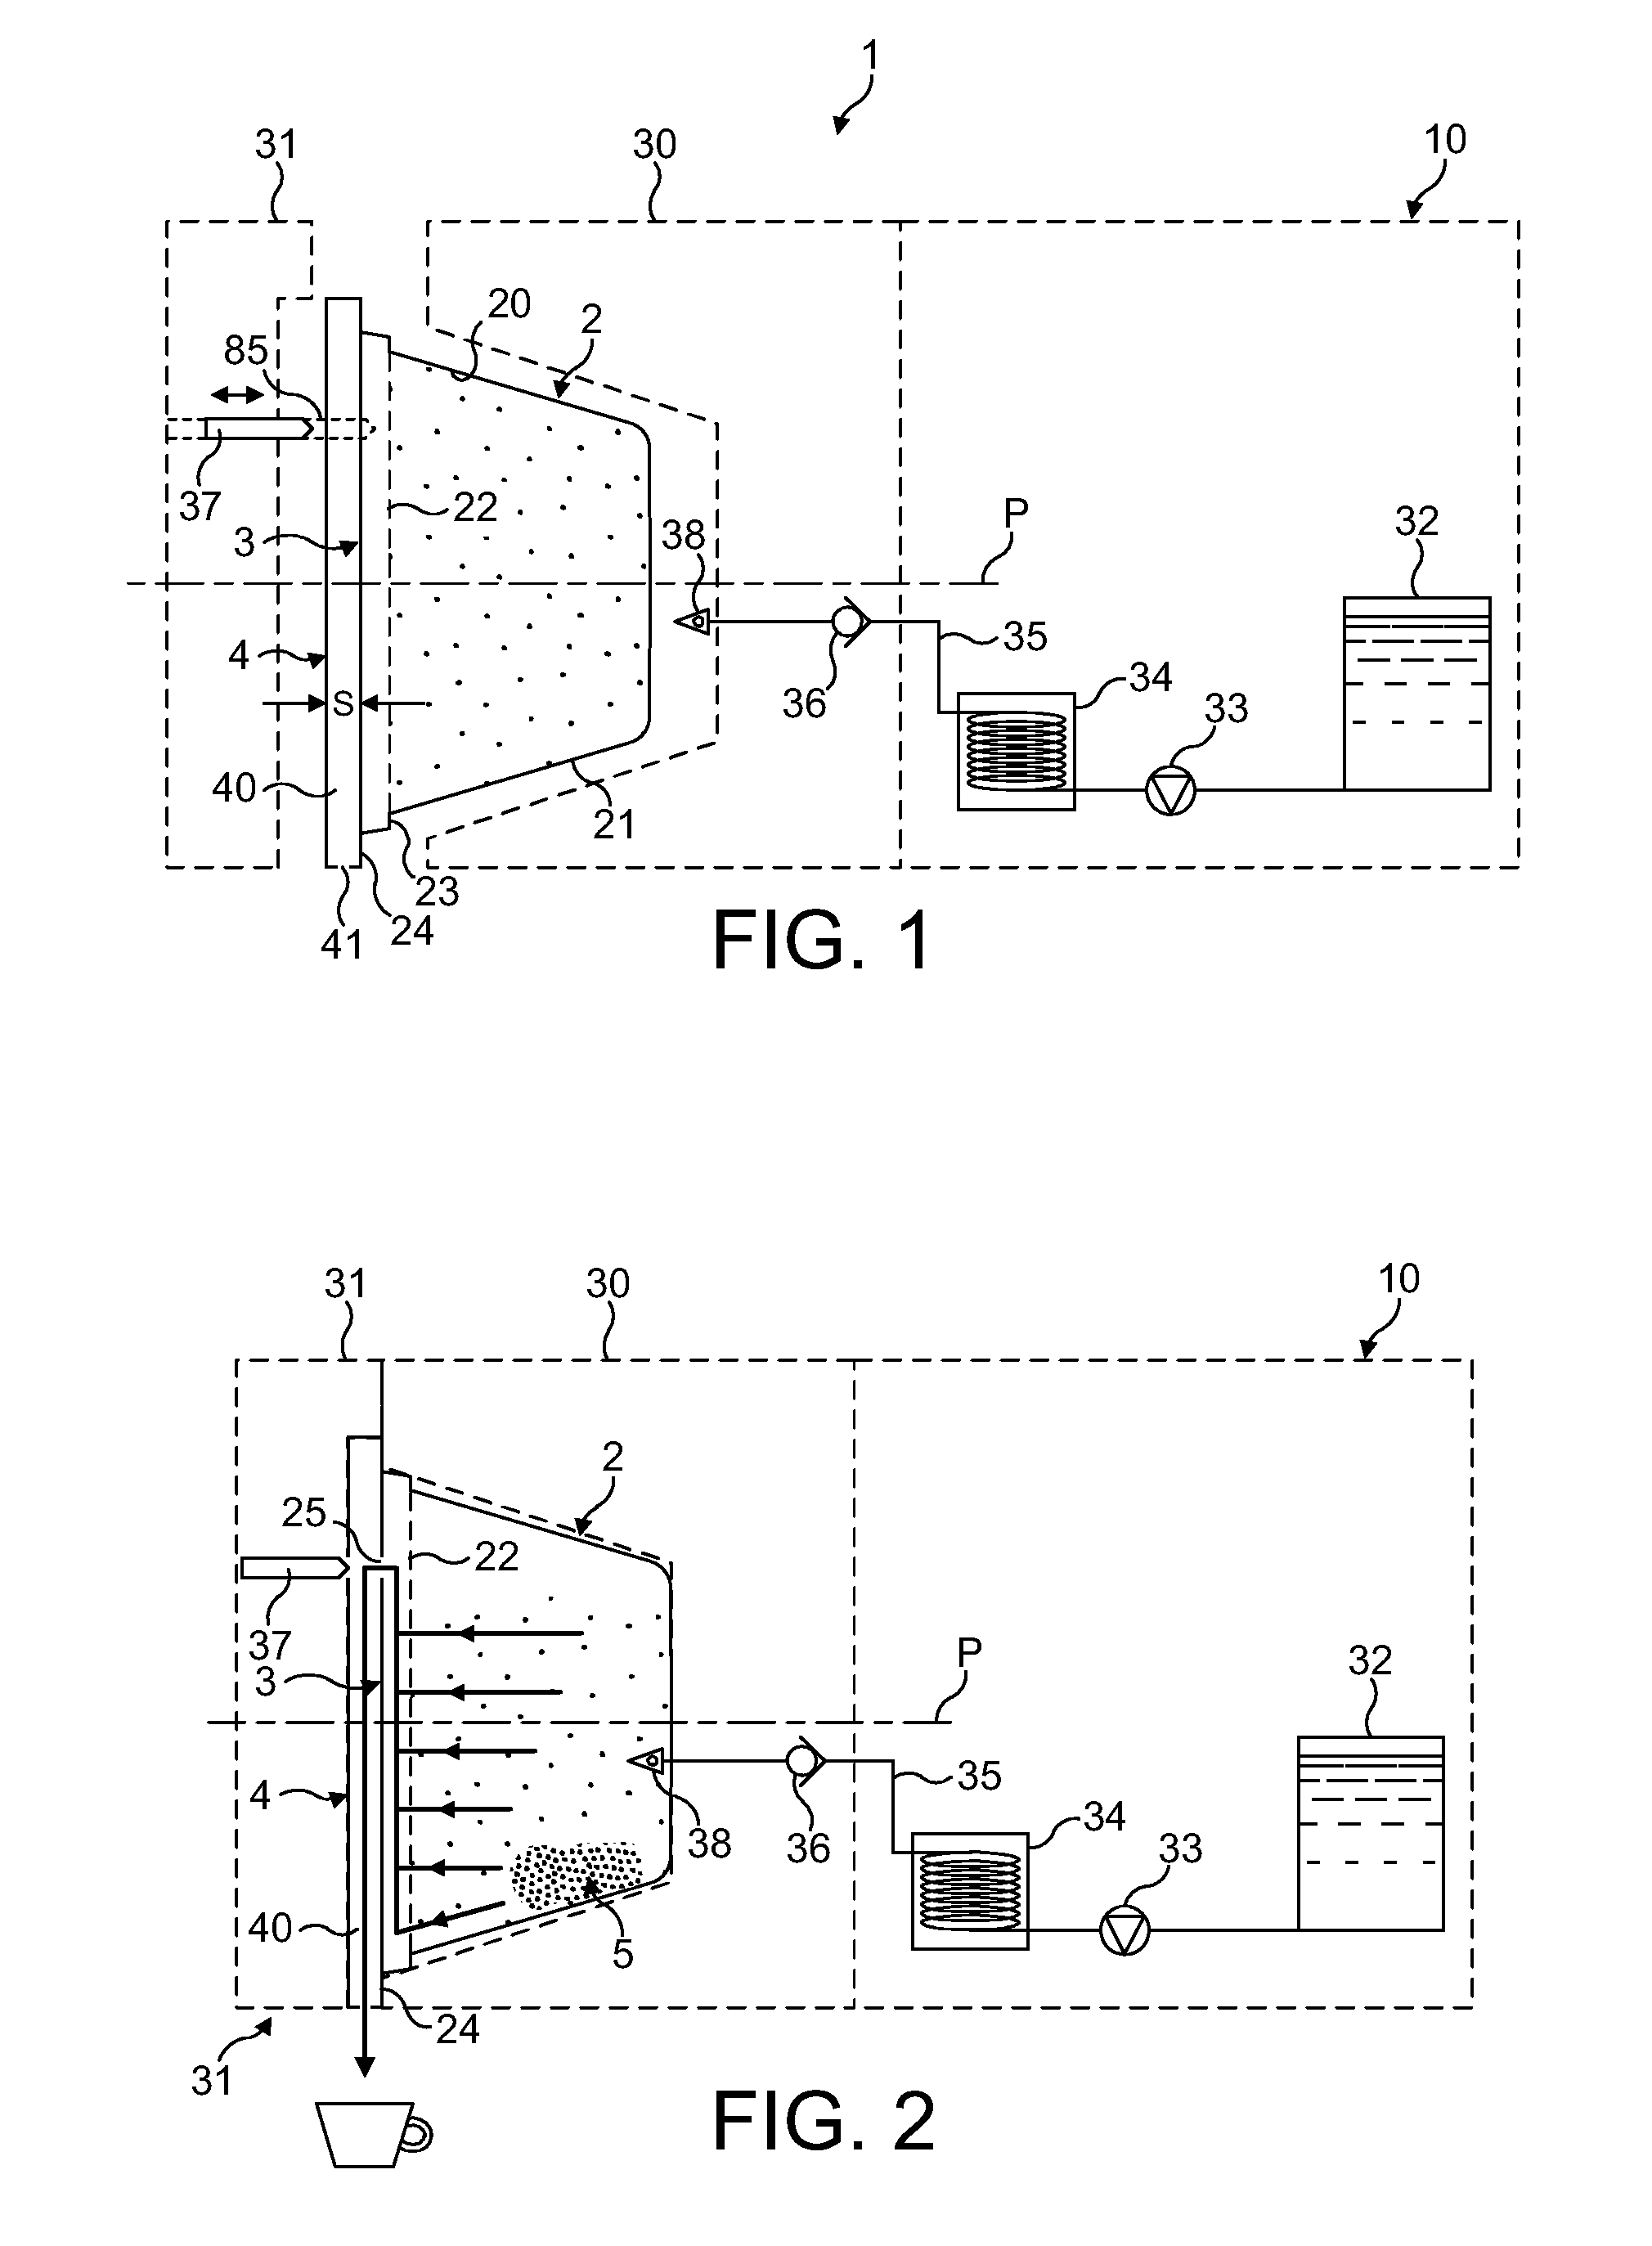 Method for preparing a beverage from a capsule